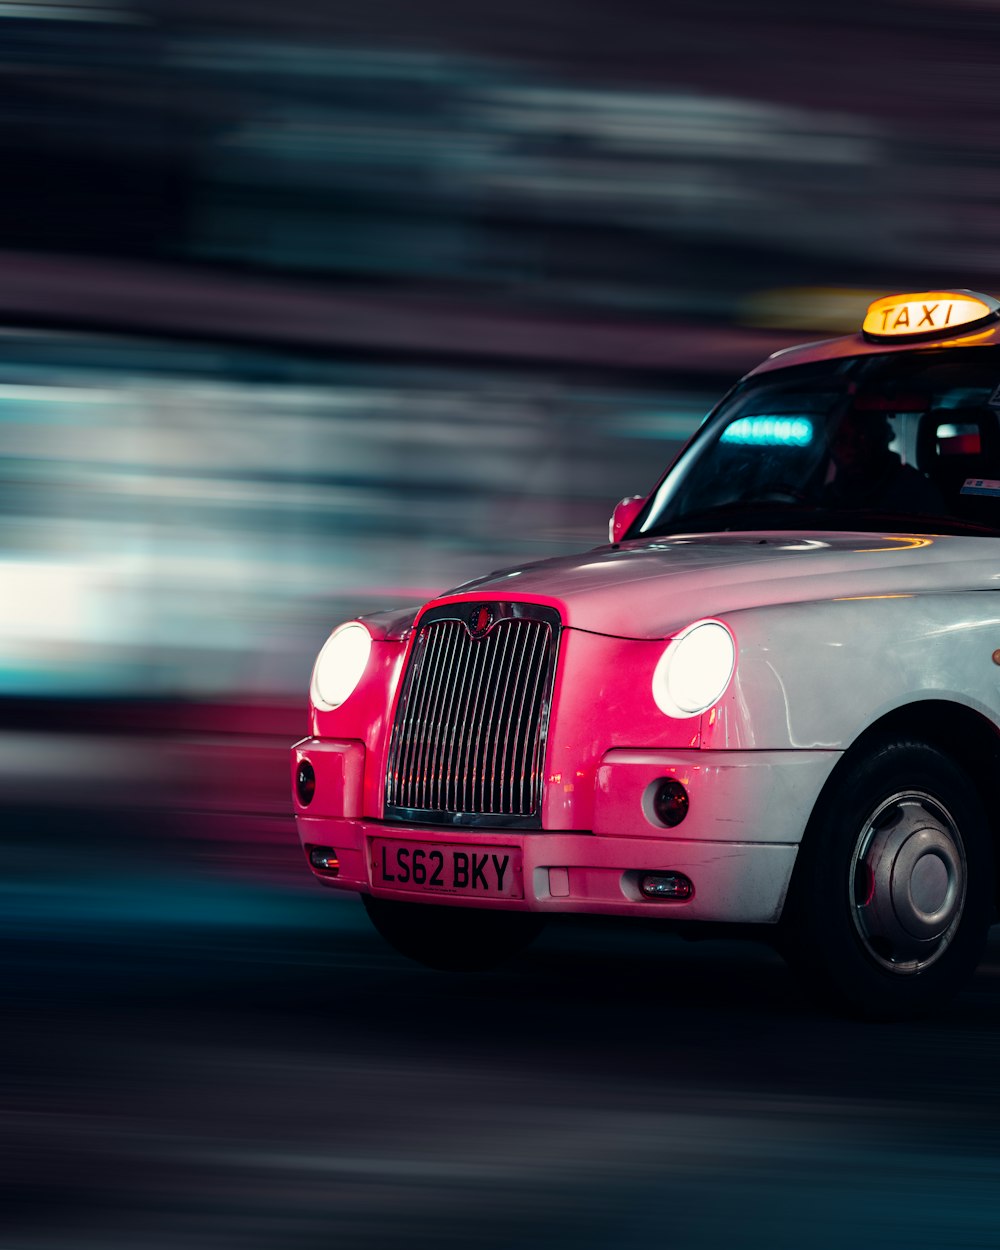 a white taxi cab driving down a street at night